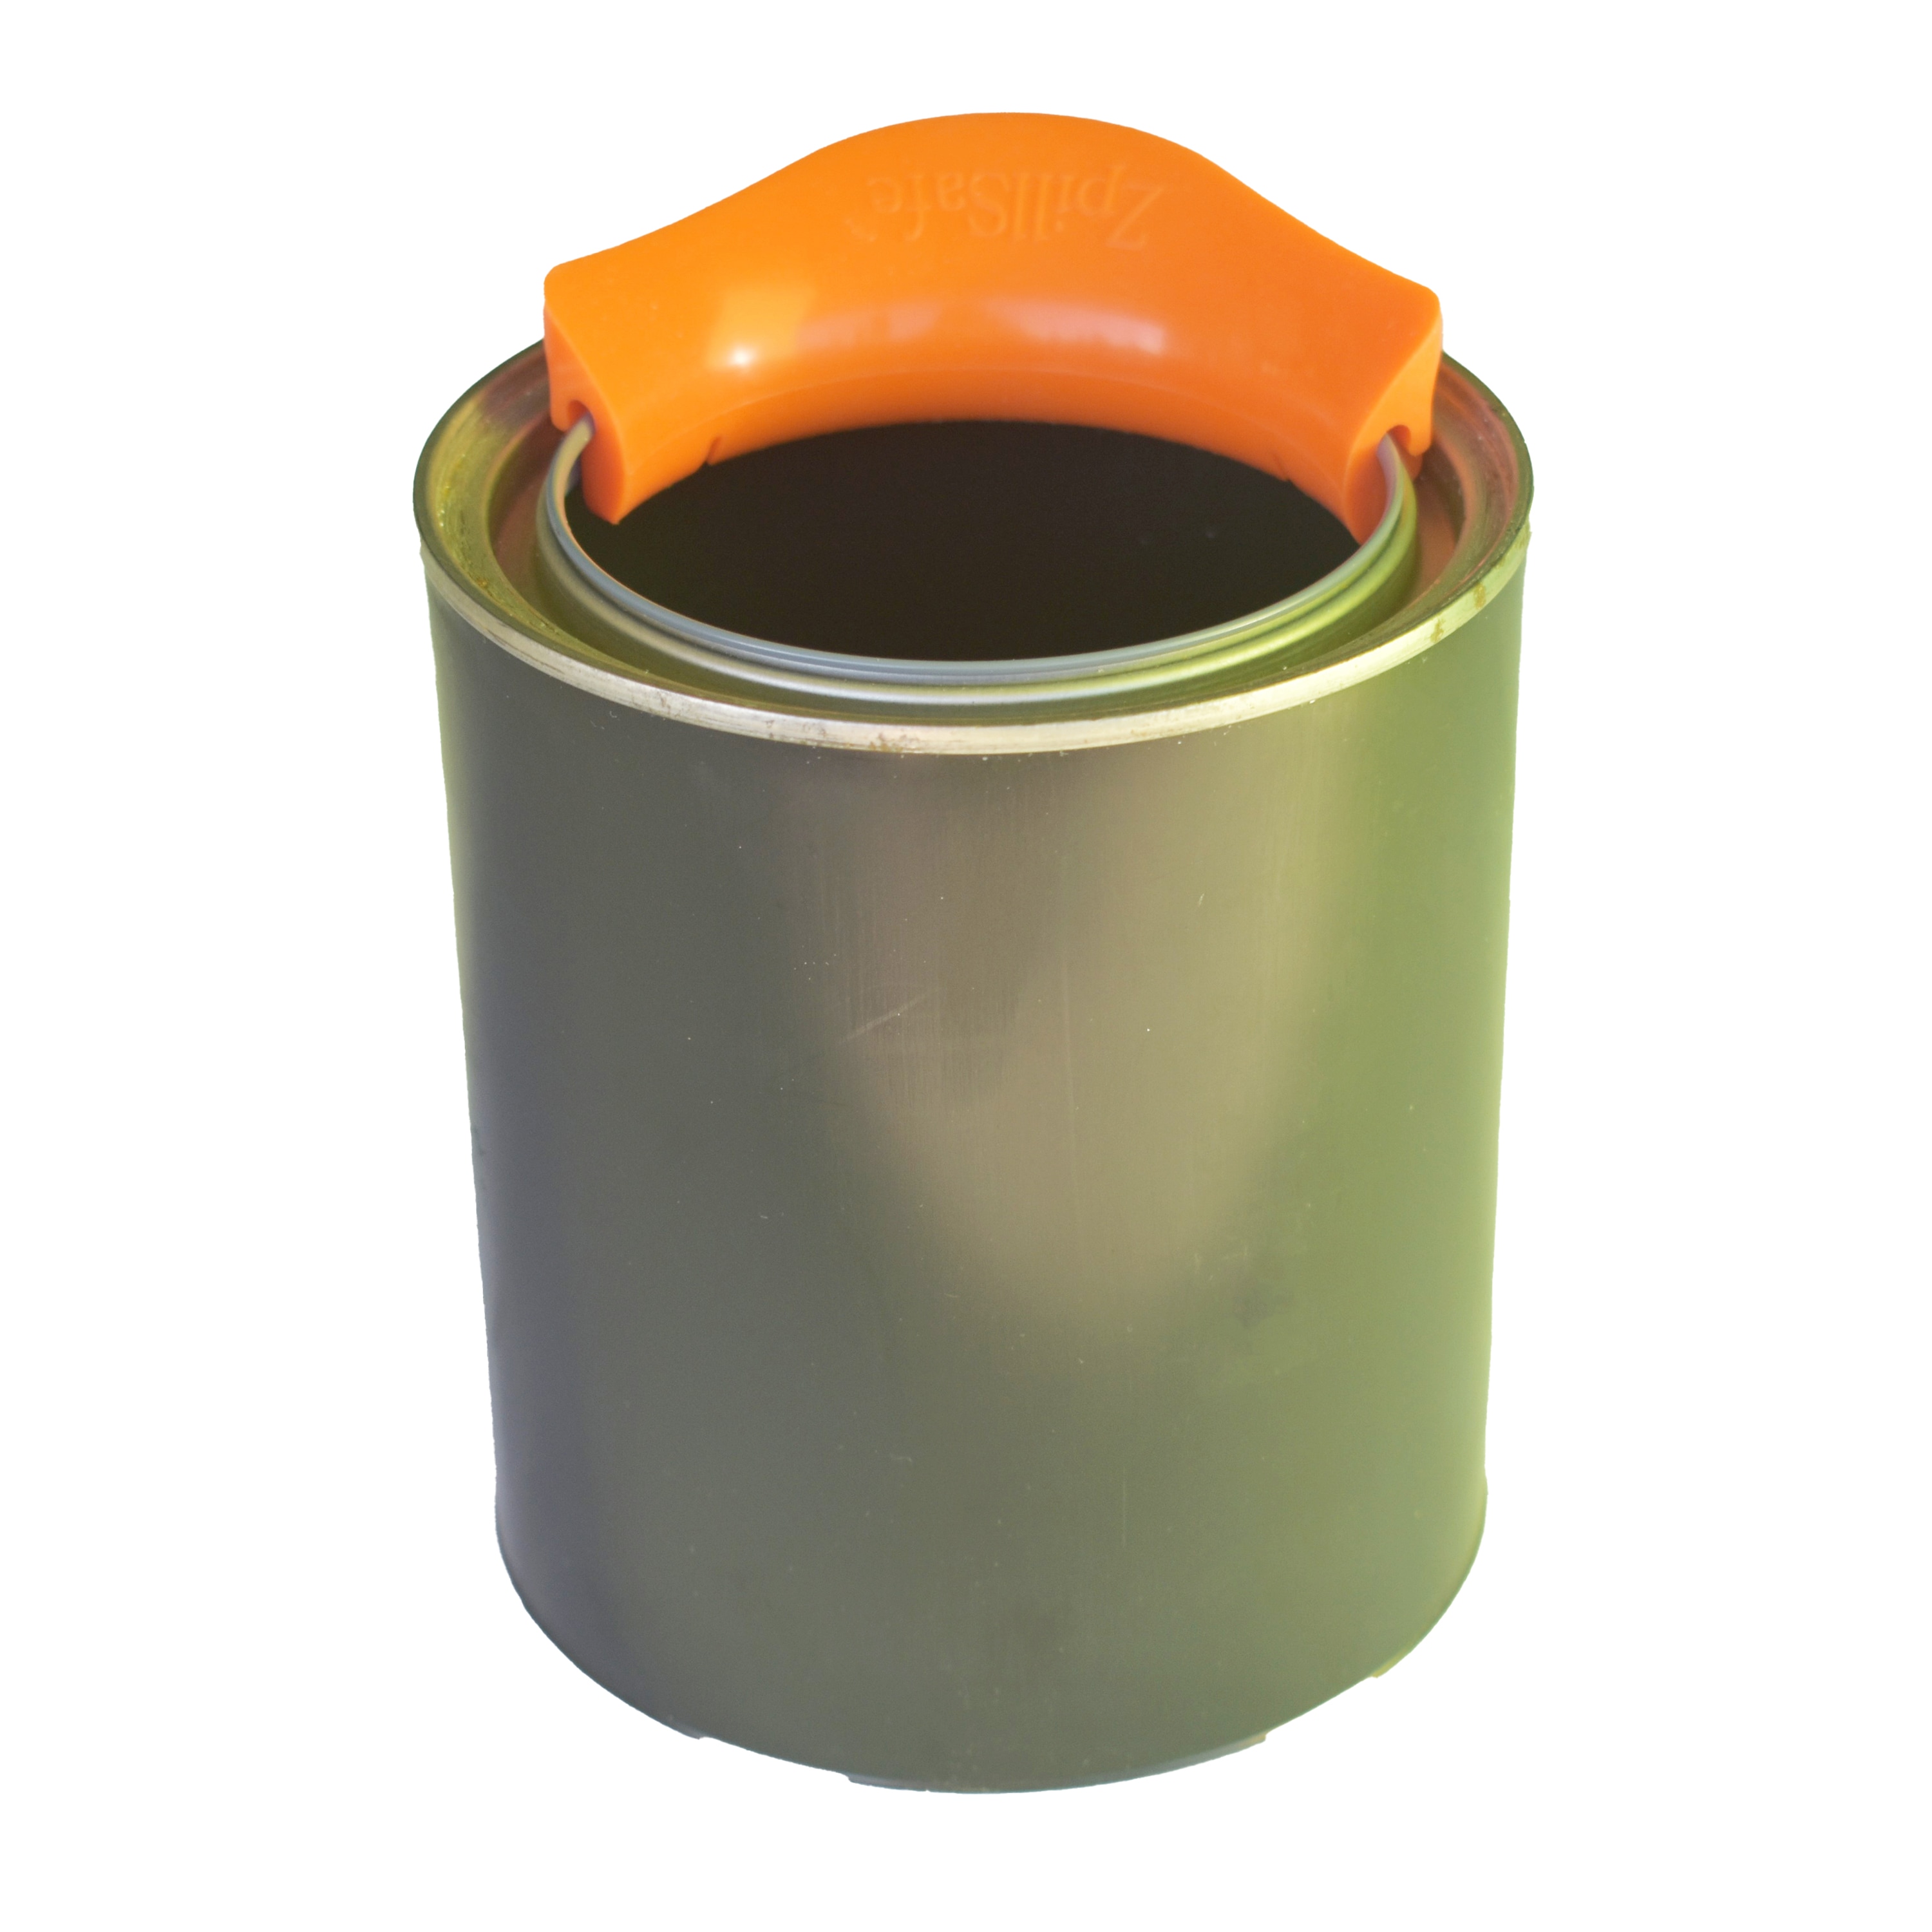 5 Gallon Green Plastic POUR SPOUT for Paint Container Bucket Can